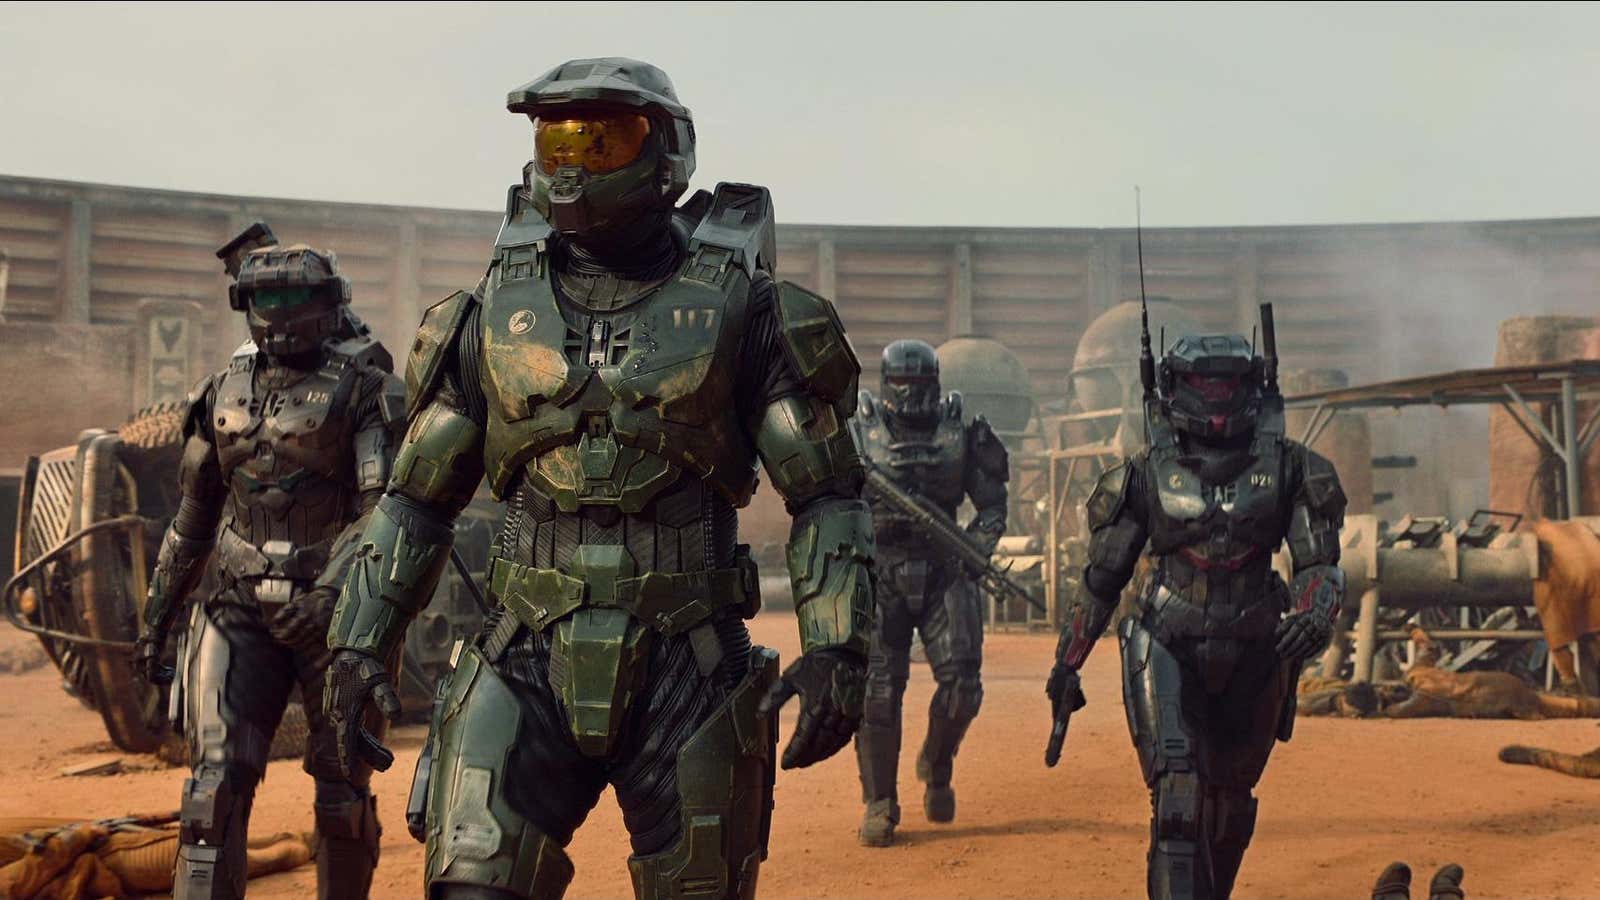 Gamers Ponder Why Cortana Is Not Blue In First Trailer For 'Halo' TV Series